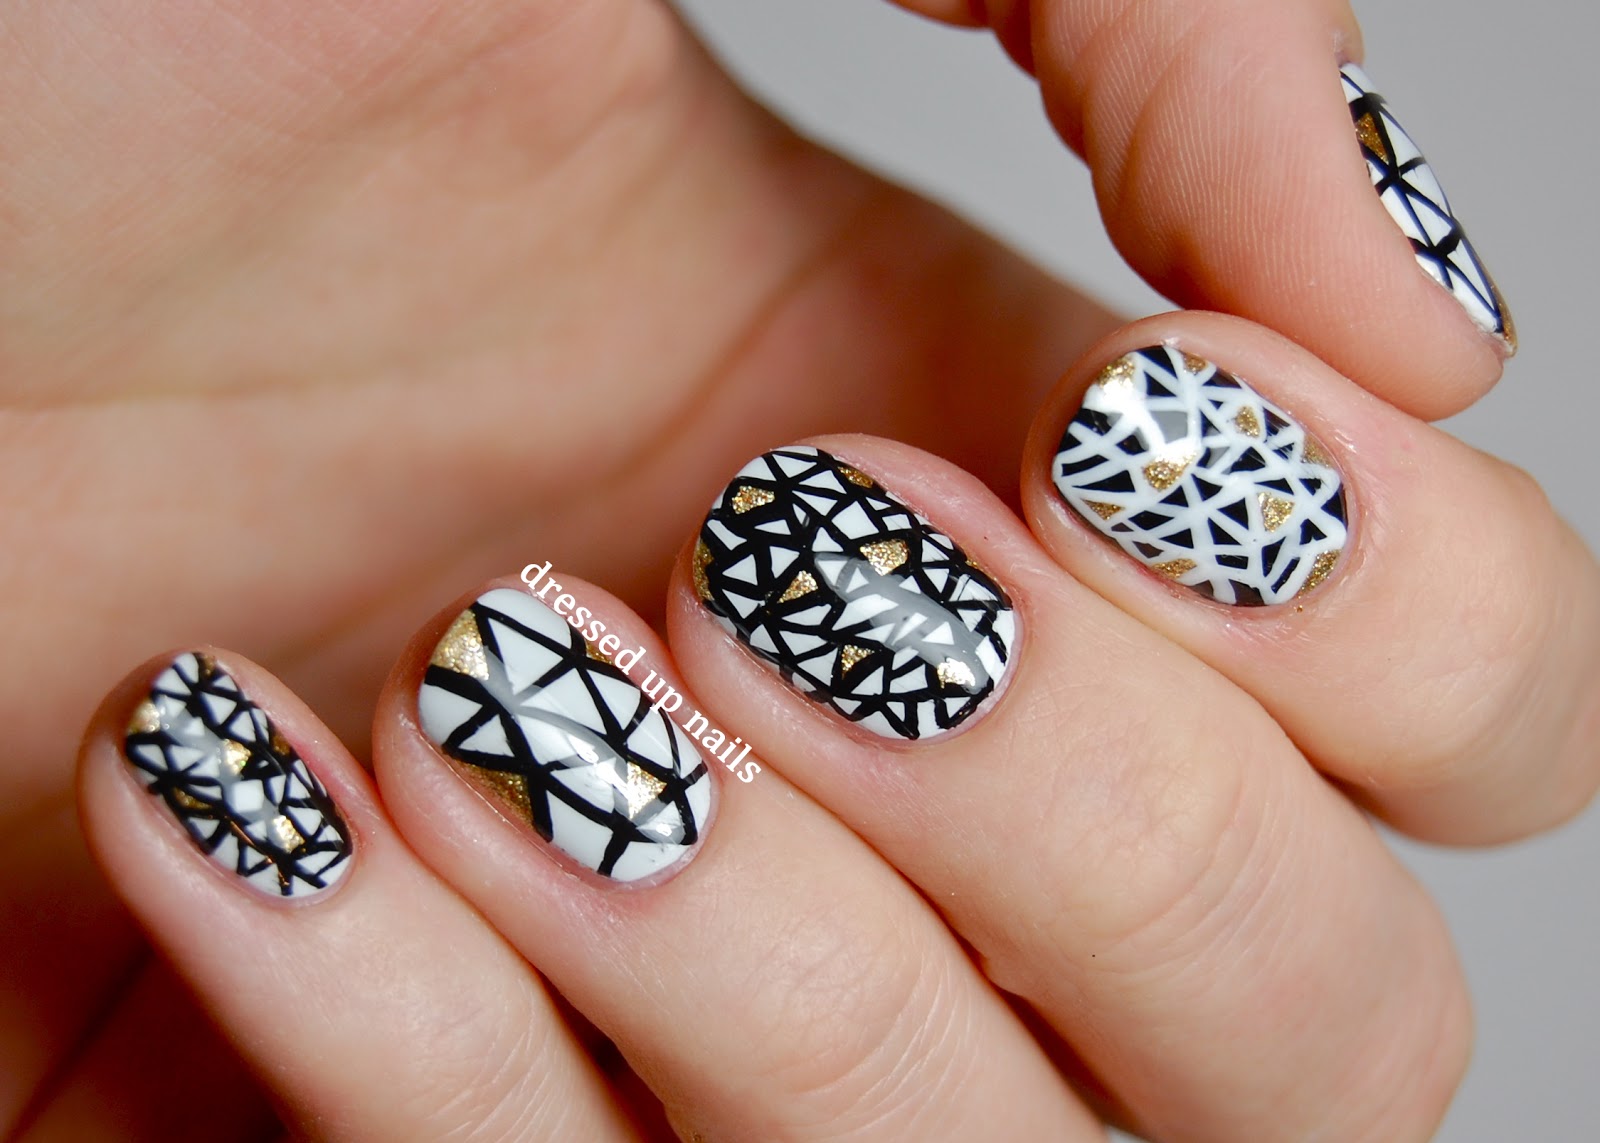 7. Beginner's Guide to Black and White Nail Art - wide 7